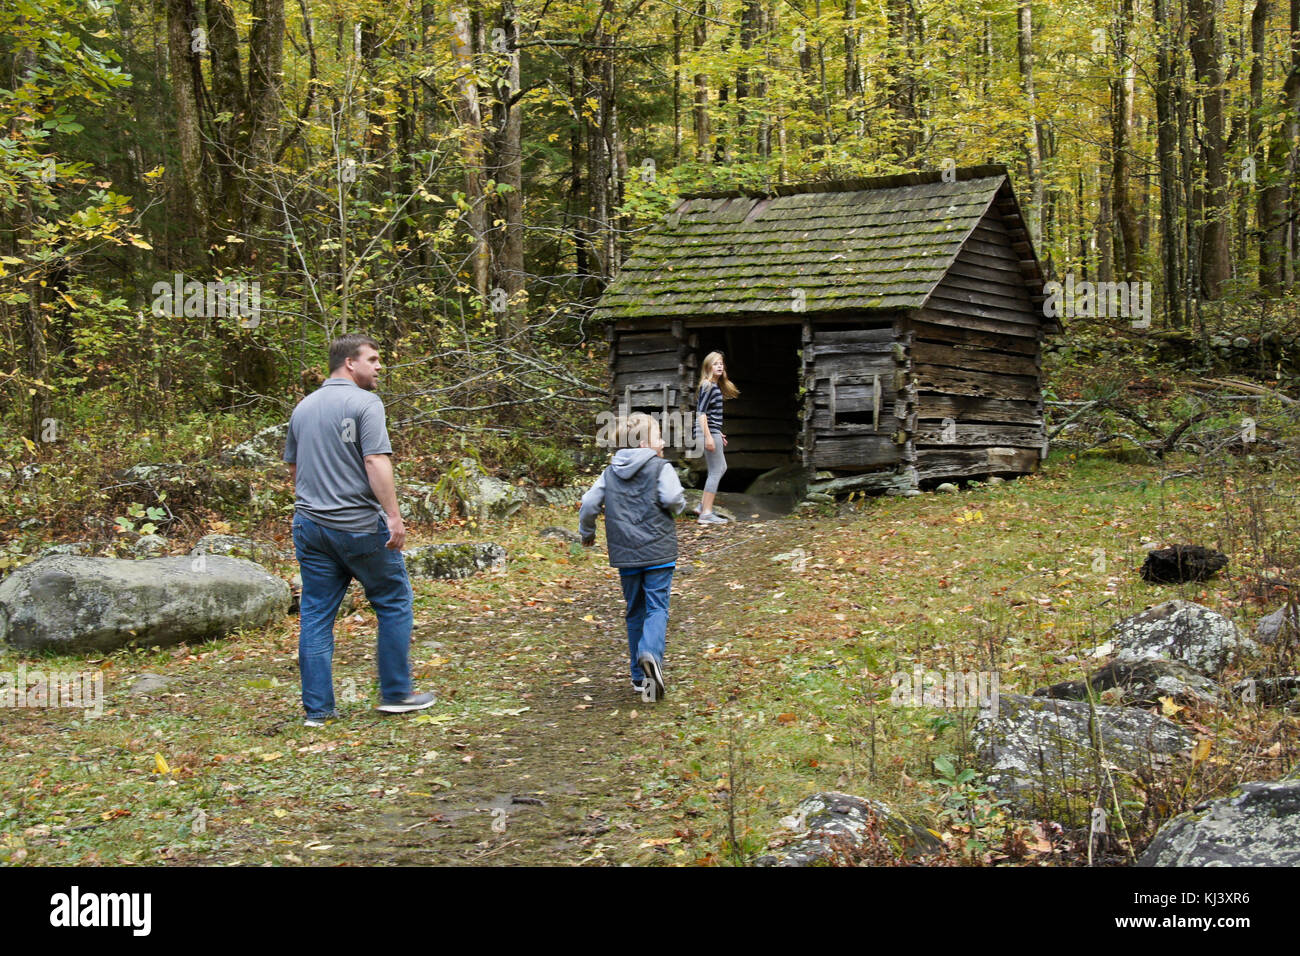 Tourists at the corn crib at the Ephraim Bales Cabin in autumn, Roaring Fork Motor Nature Trail, Great Smoky Mountains National Park, Tennessee Stock Photo